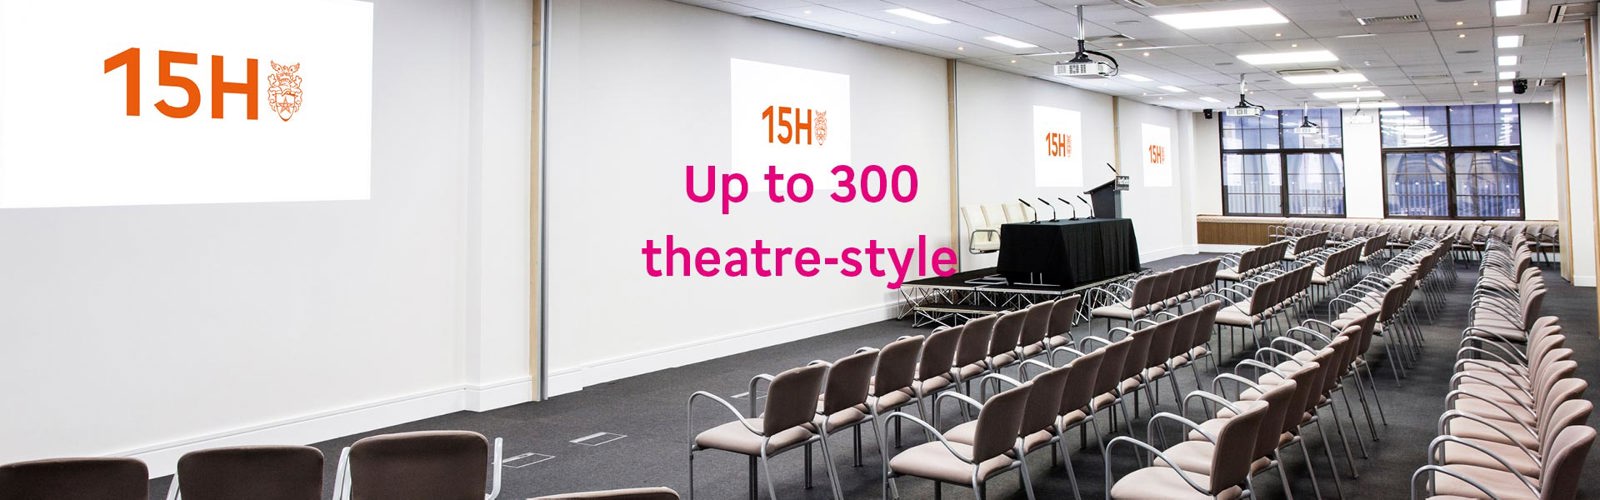 15Hatfields conference room with the words 'Up to 300 theatre-style'